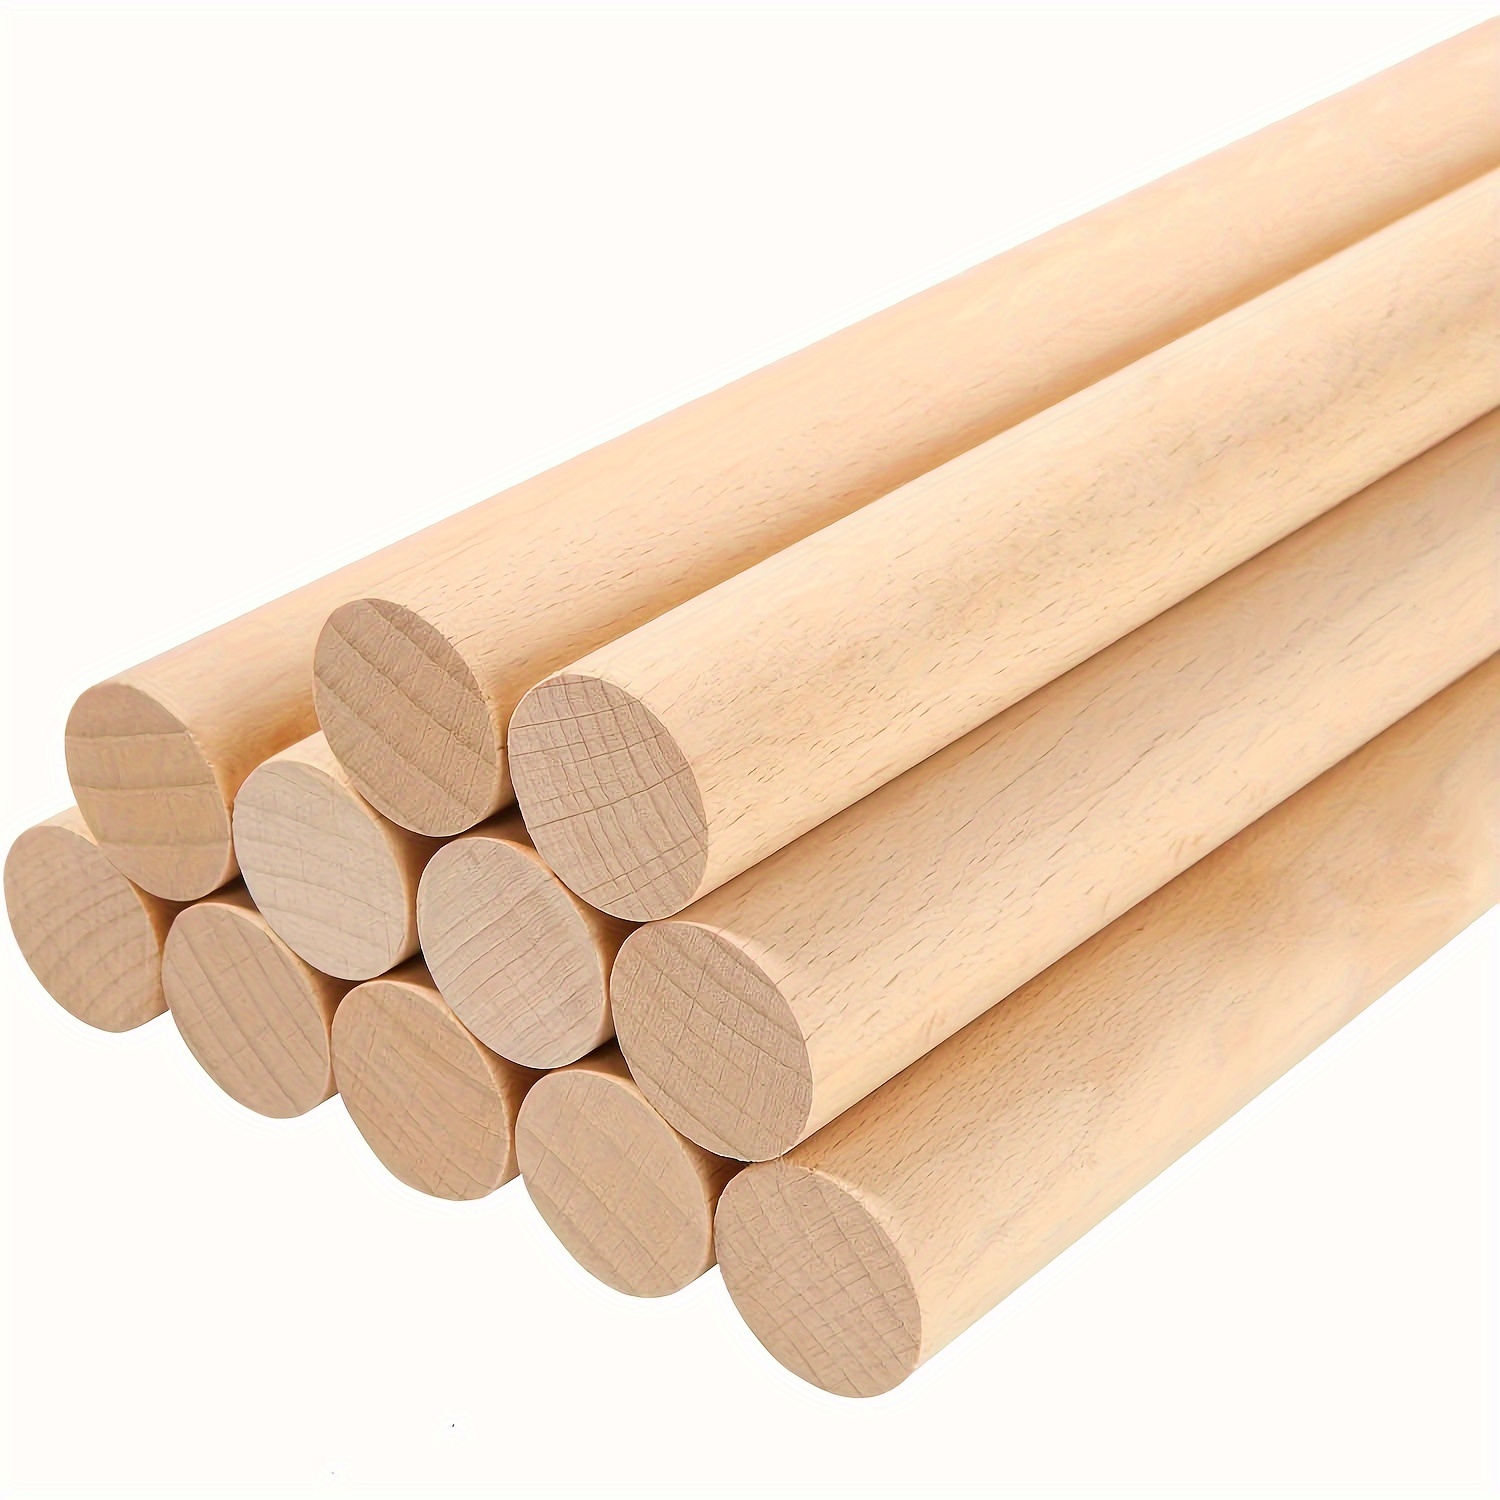 Craft County Natural Wooden Dowel Rod - Multiple Lengths and Packs  Available - Use for Macrame, Home Decor, Handmade Gifts, and More